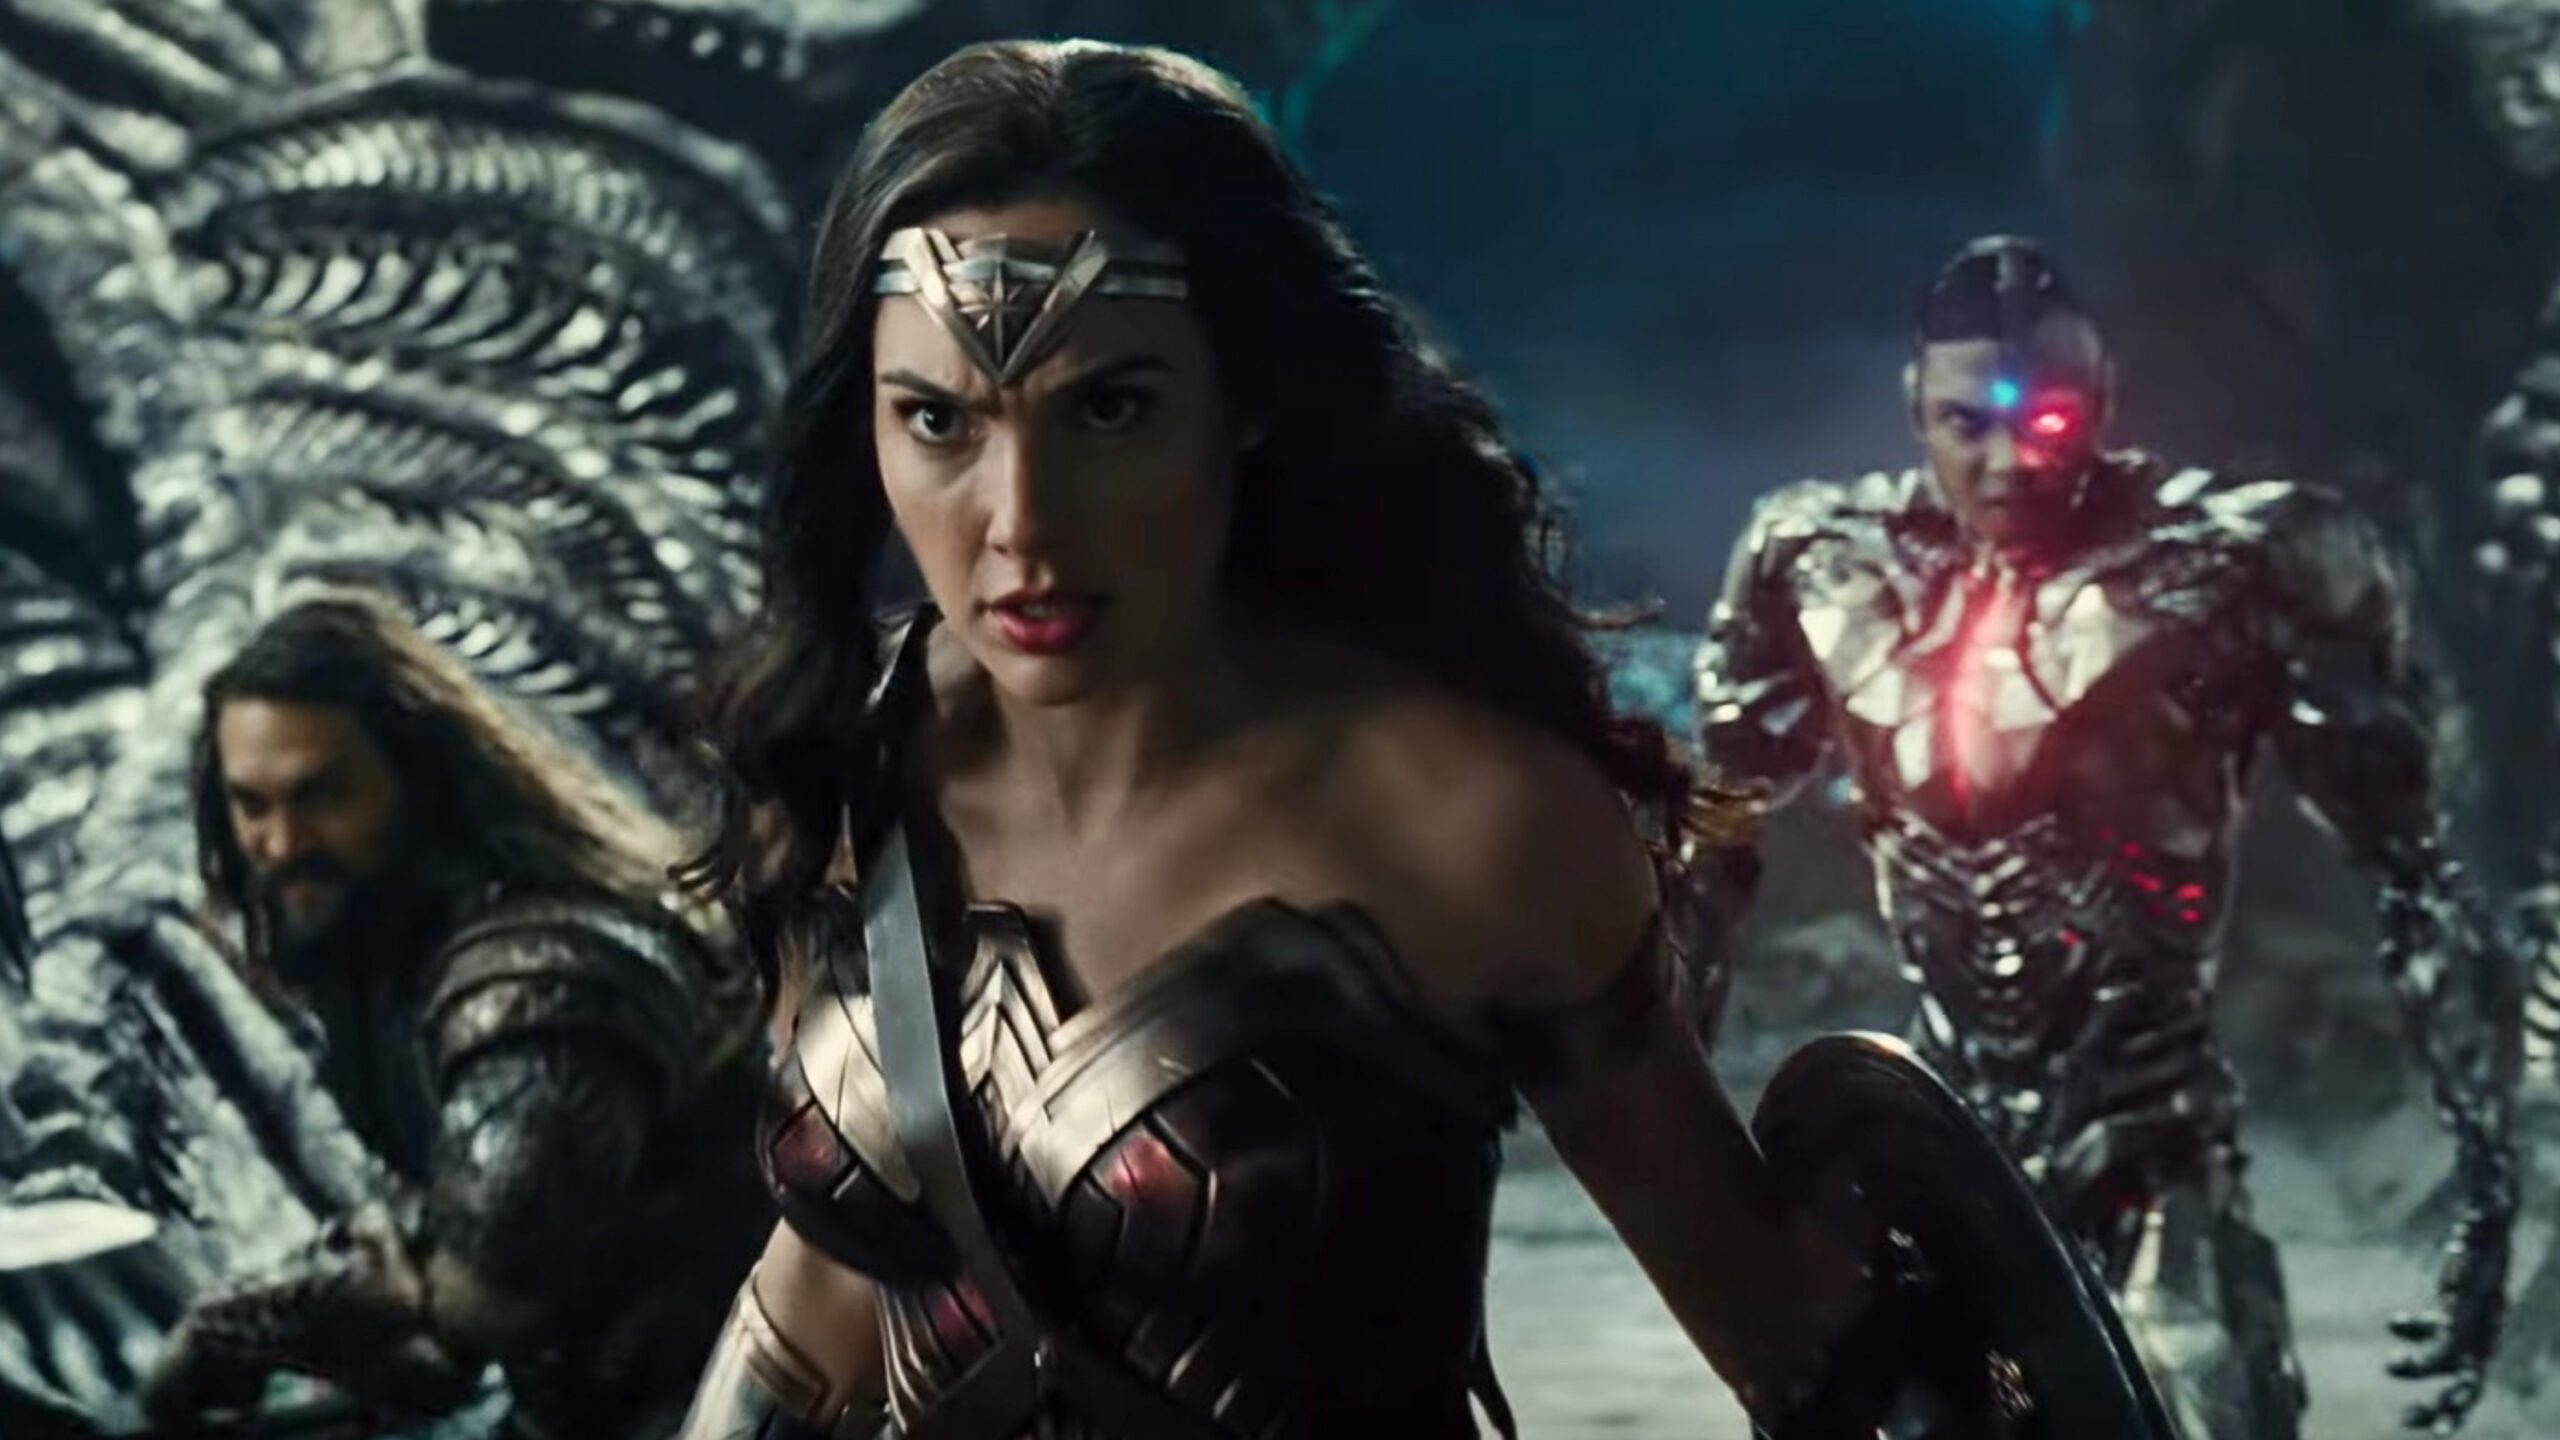 WATCH: First ‘Justice League’ trailer released